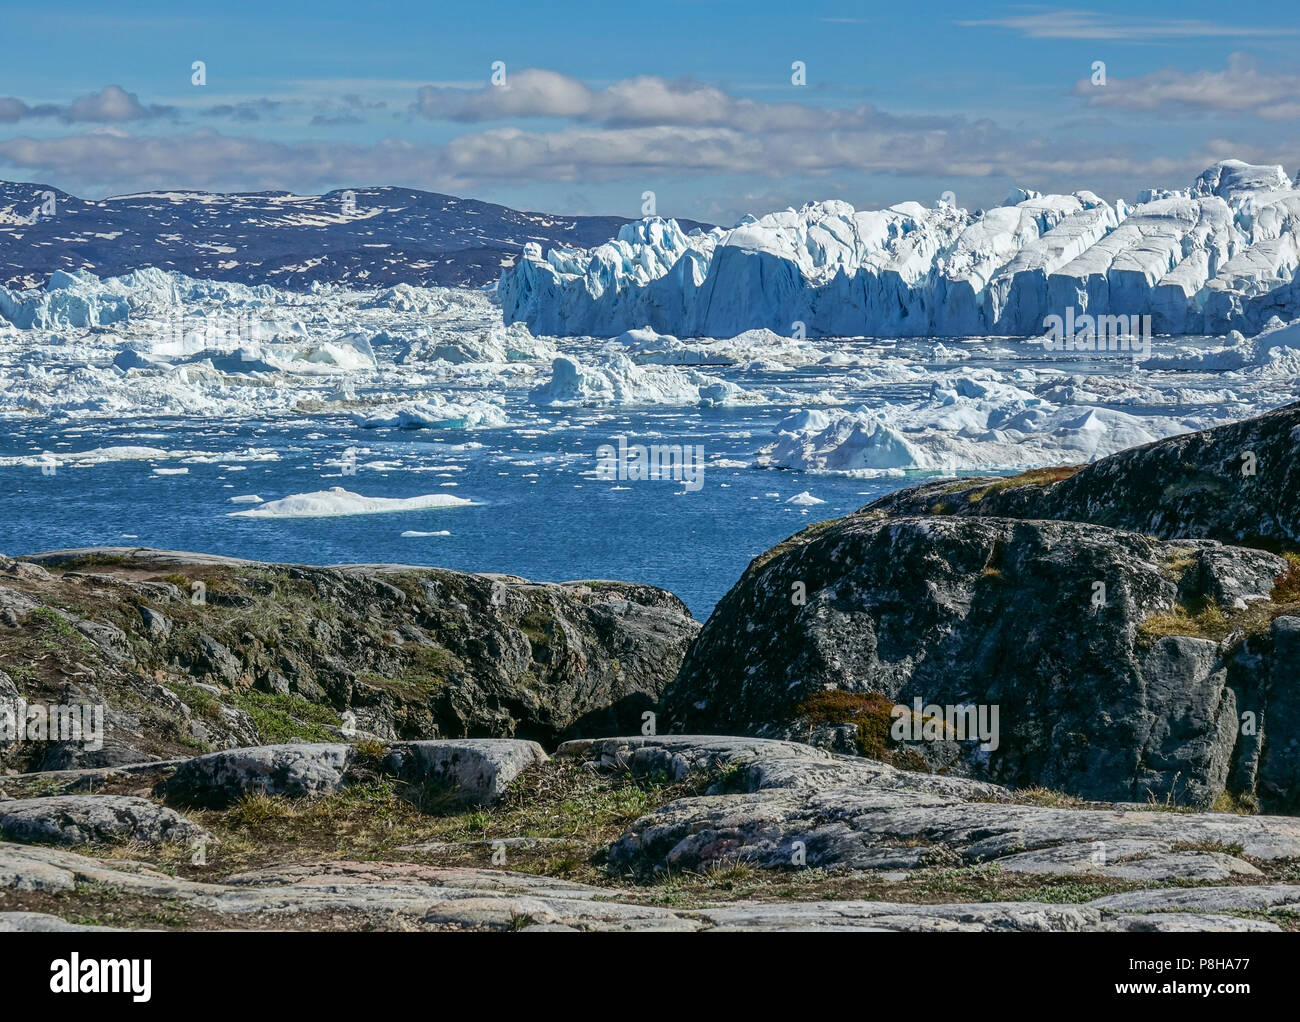 22.06.2018, Gronland, Denmark: Huge icebergs floating in the sea in front of the coastal town of Ilulissat in western Greenland. The city is located on the Ilulissat Icefjord, which is known for its particularly large icebergs in Disko Bay. Photo: Patrick Pleul/dpa-Zentralbild/ZB | usage worldwide Stock Photo